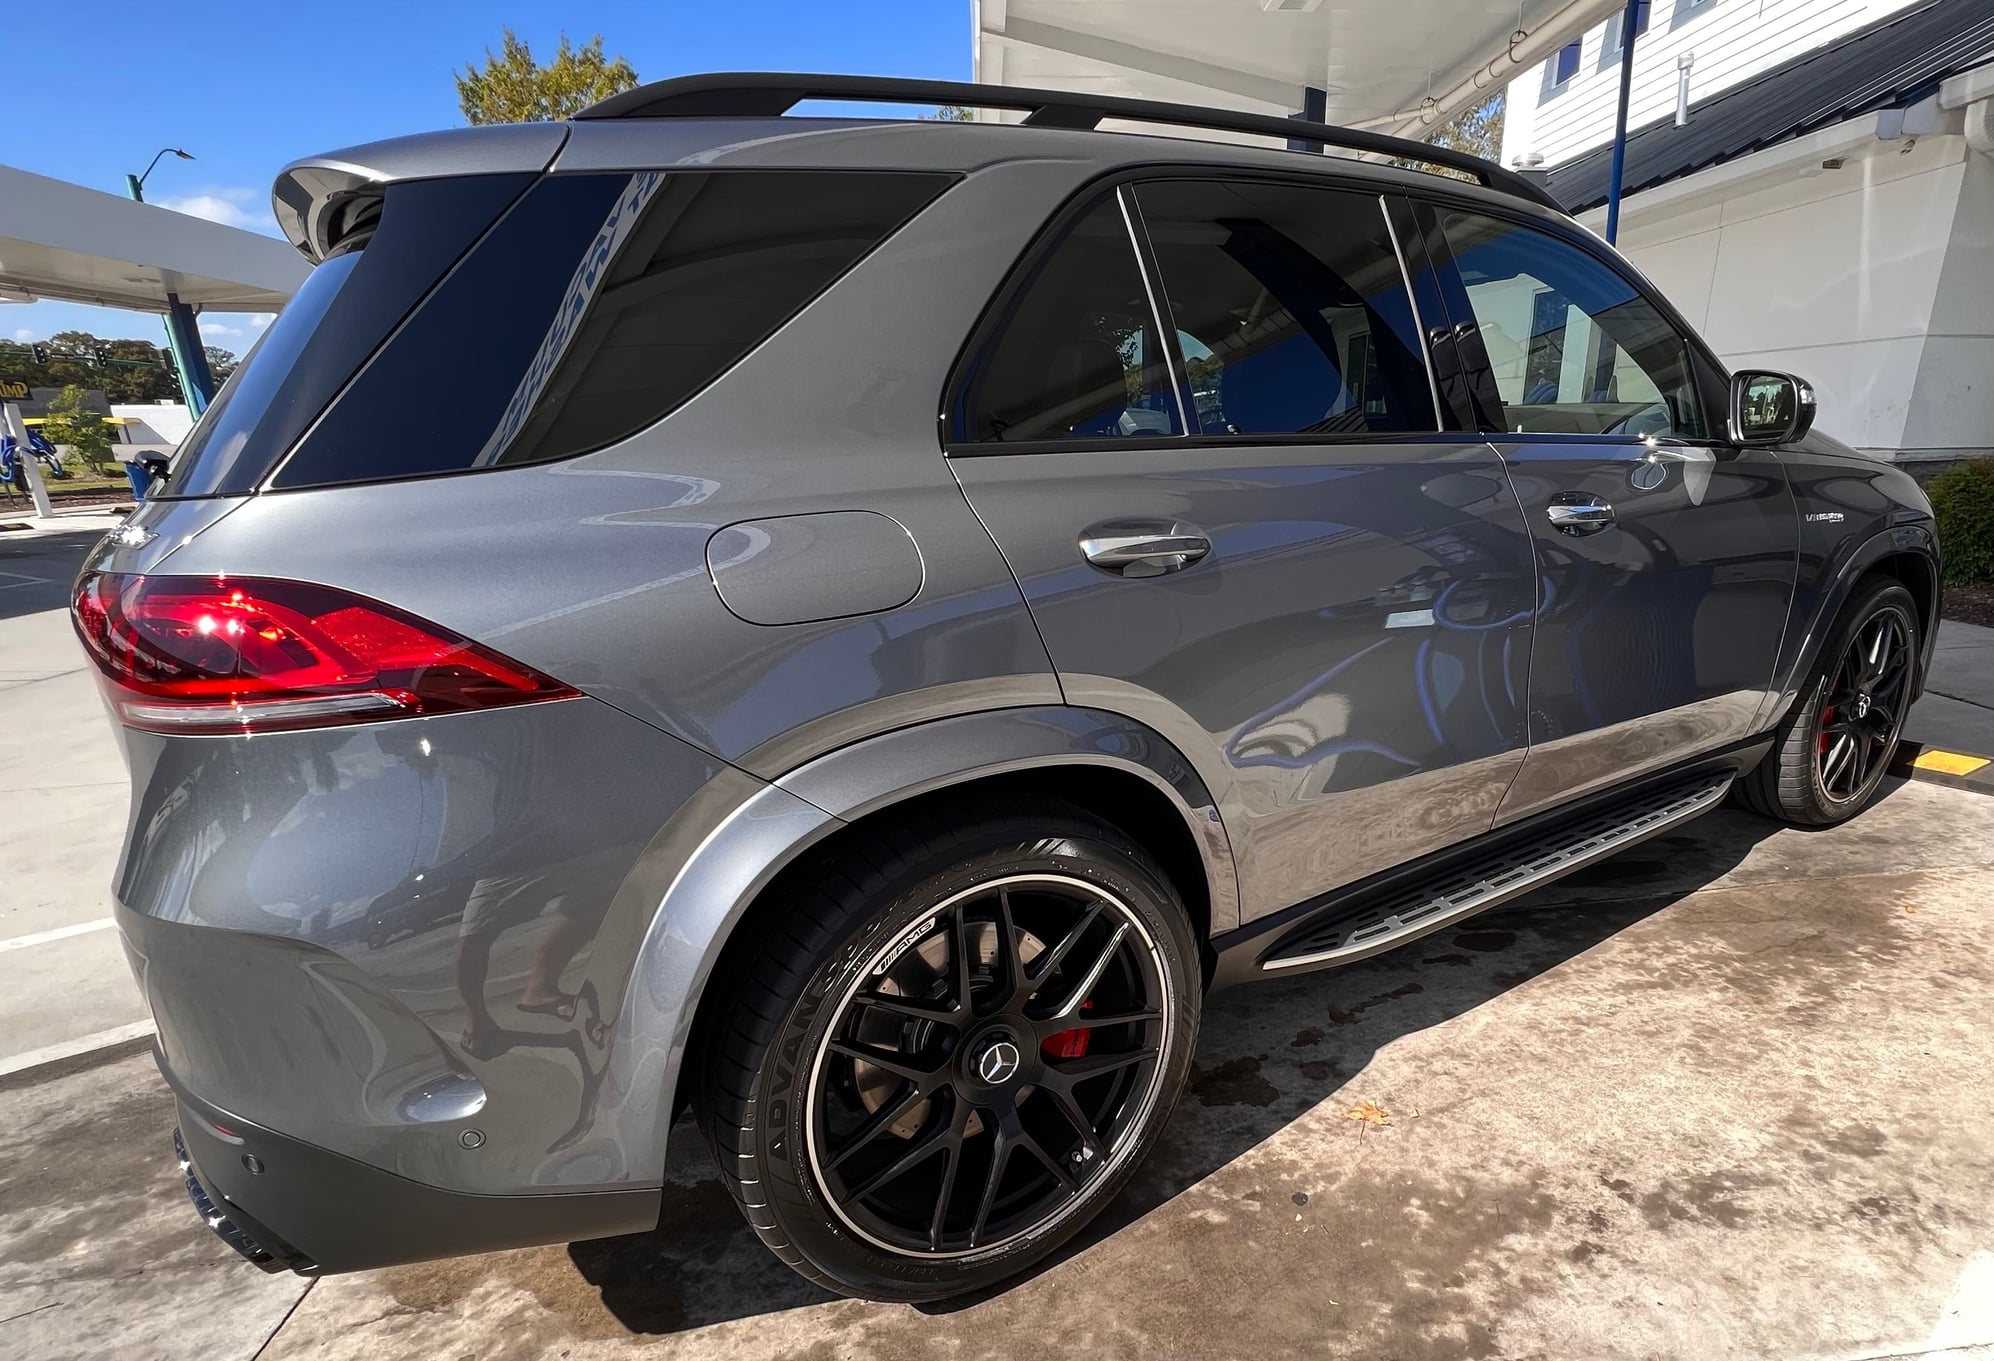 2022 Mercedes-Benz GLE-Class - AMG 63S Perfect - Used - VIN 4JGFB8KB5NA815079 - 3,900 Miles - 8 cyl - AWD - Automatic - SUV - Gray - Virginia Beach, VA 23451, United States